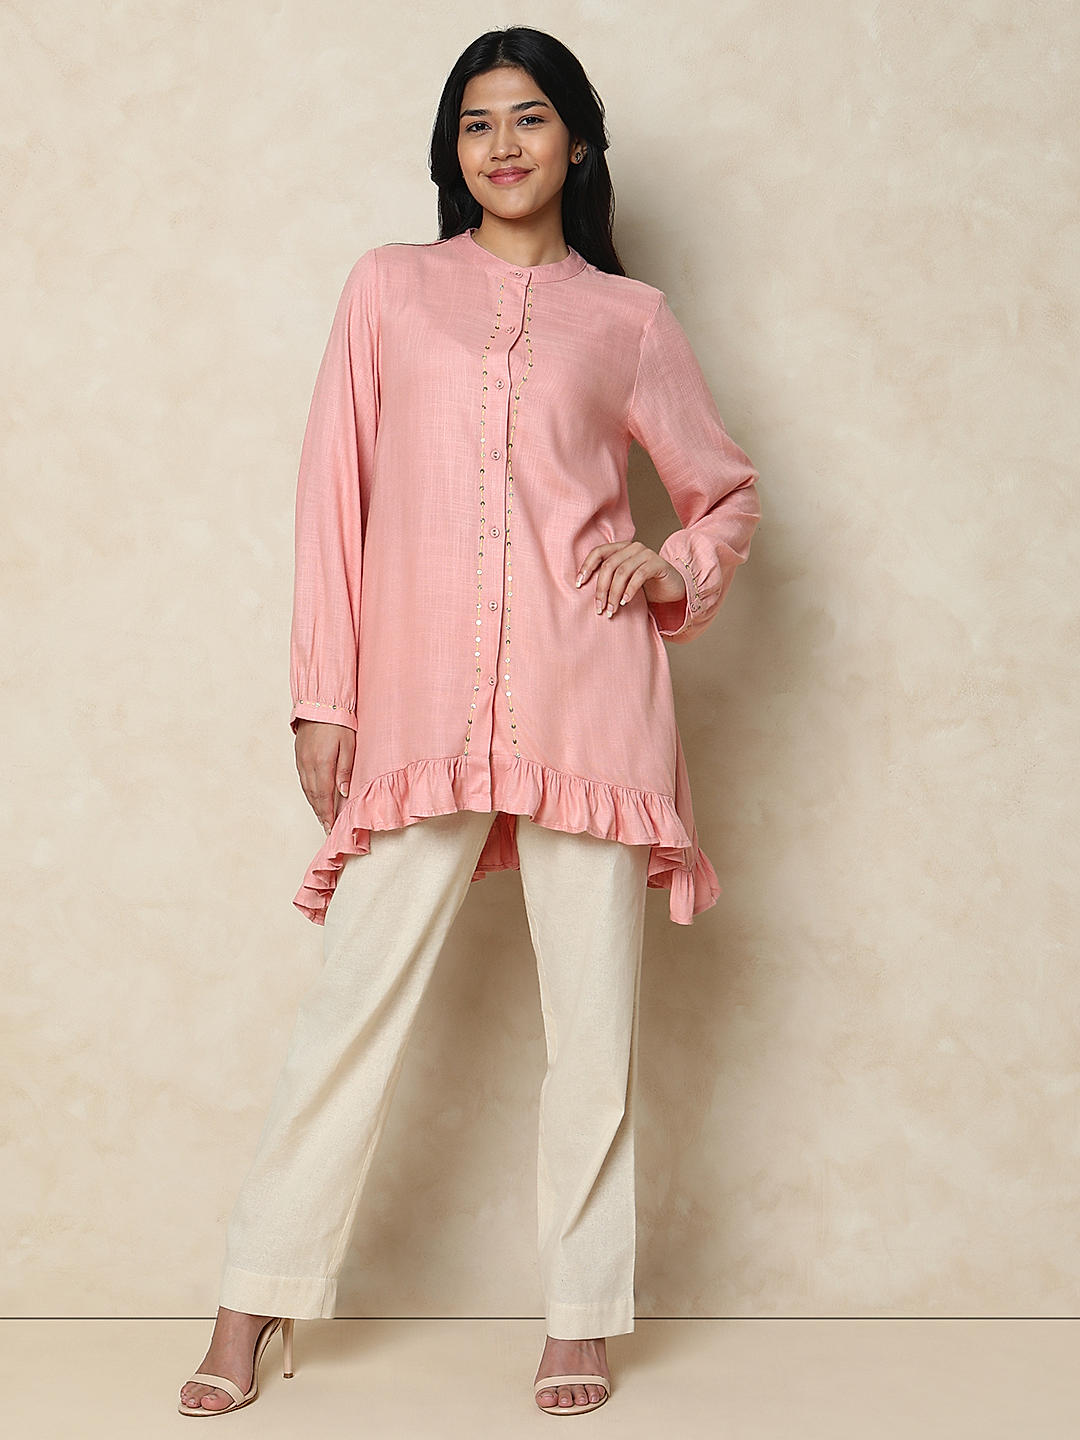 The DRESS SHOP - DS 17 927 Ivory short kurti paired with... | Facebook